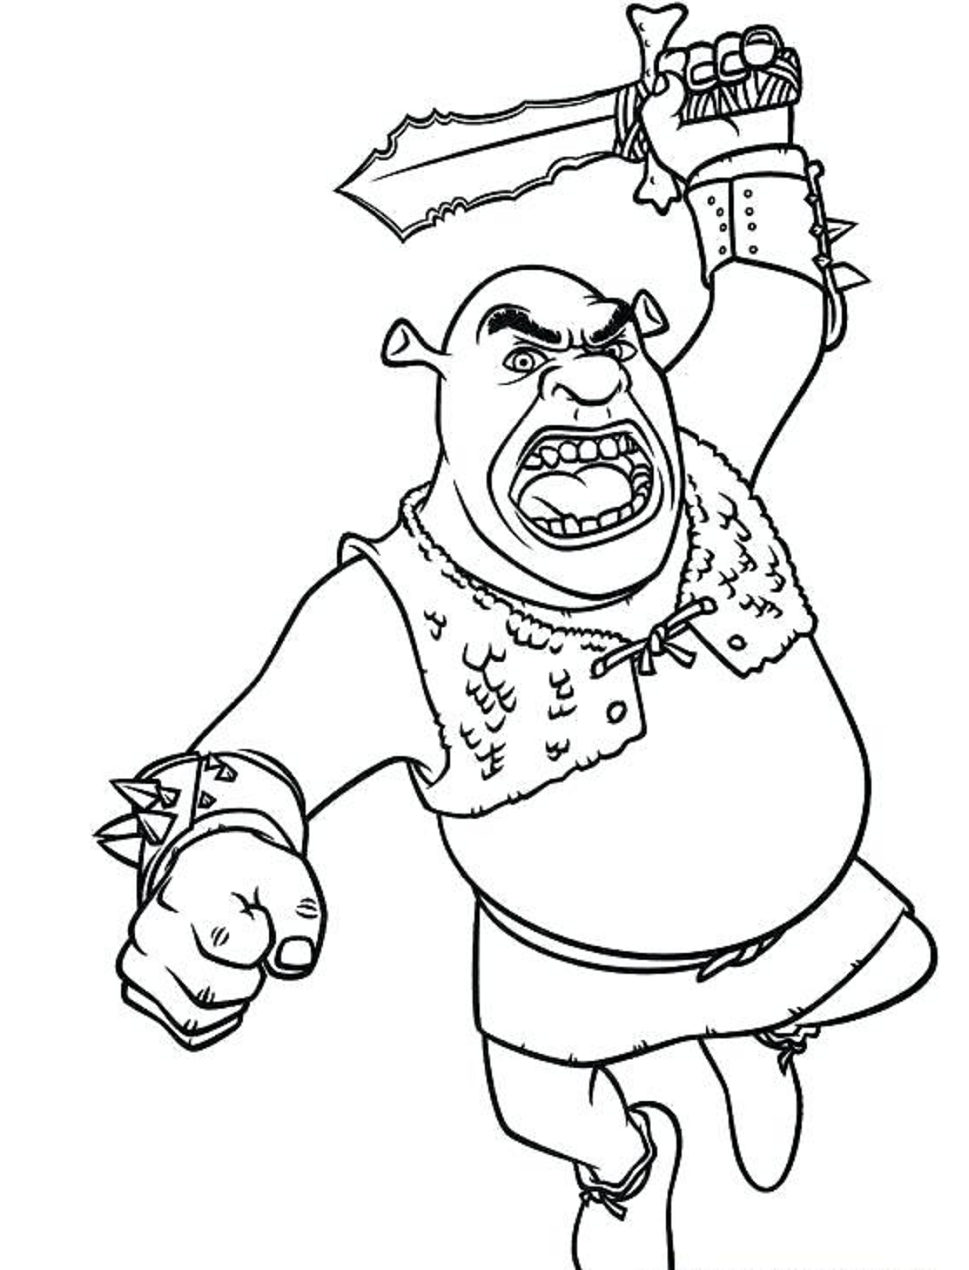 Download The Shrek Coloring Page - Free Printable Coloring Pages for Kids